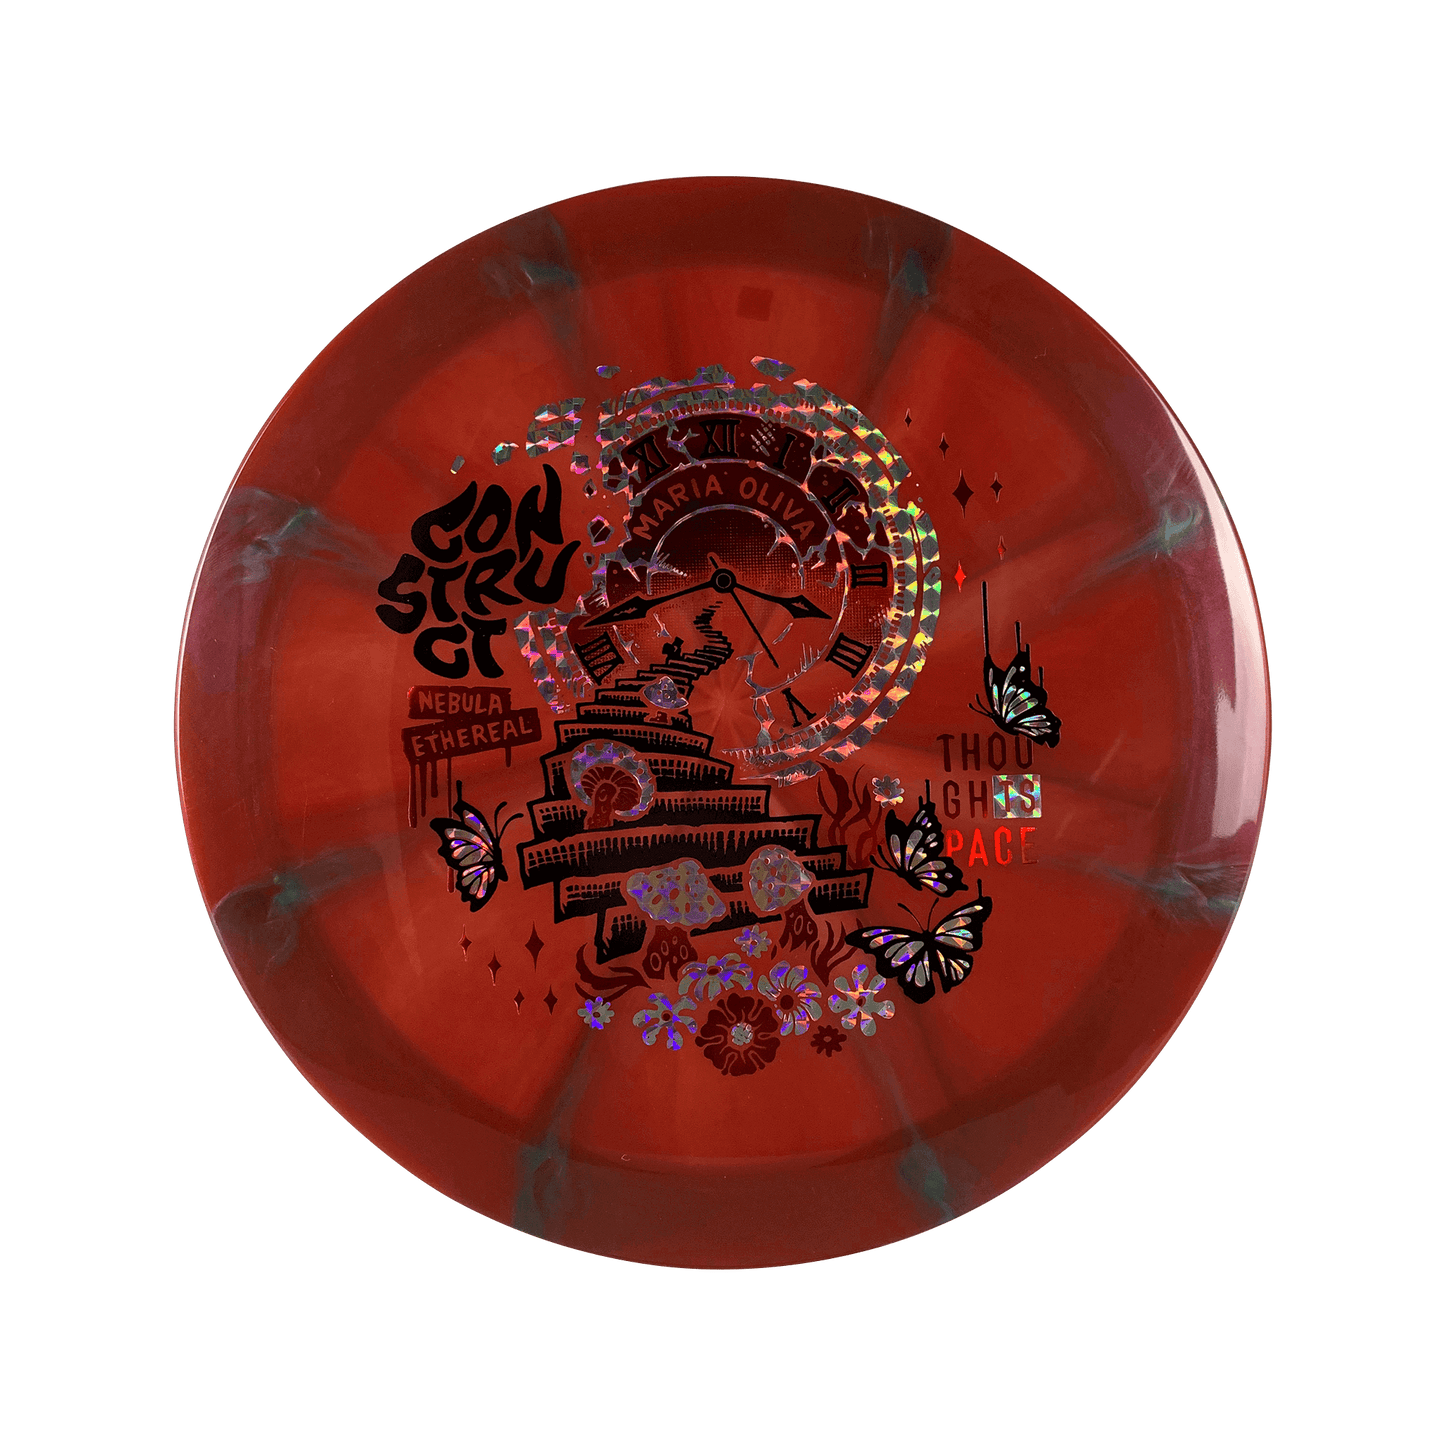 Nebula Ethereal Construct - Maria Olivia Signature Series Disc Thought Space Athletics multi / red 174 